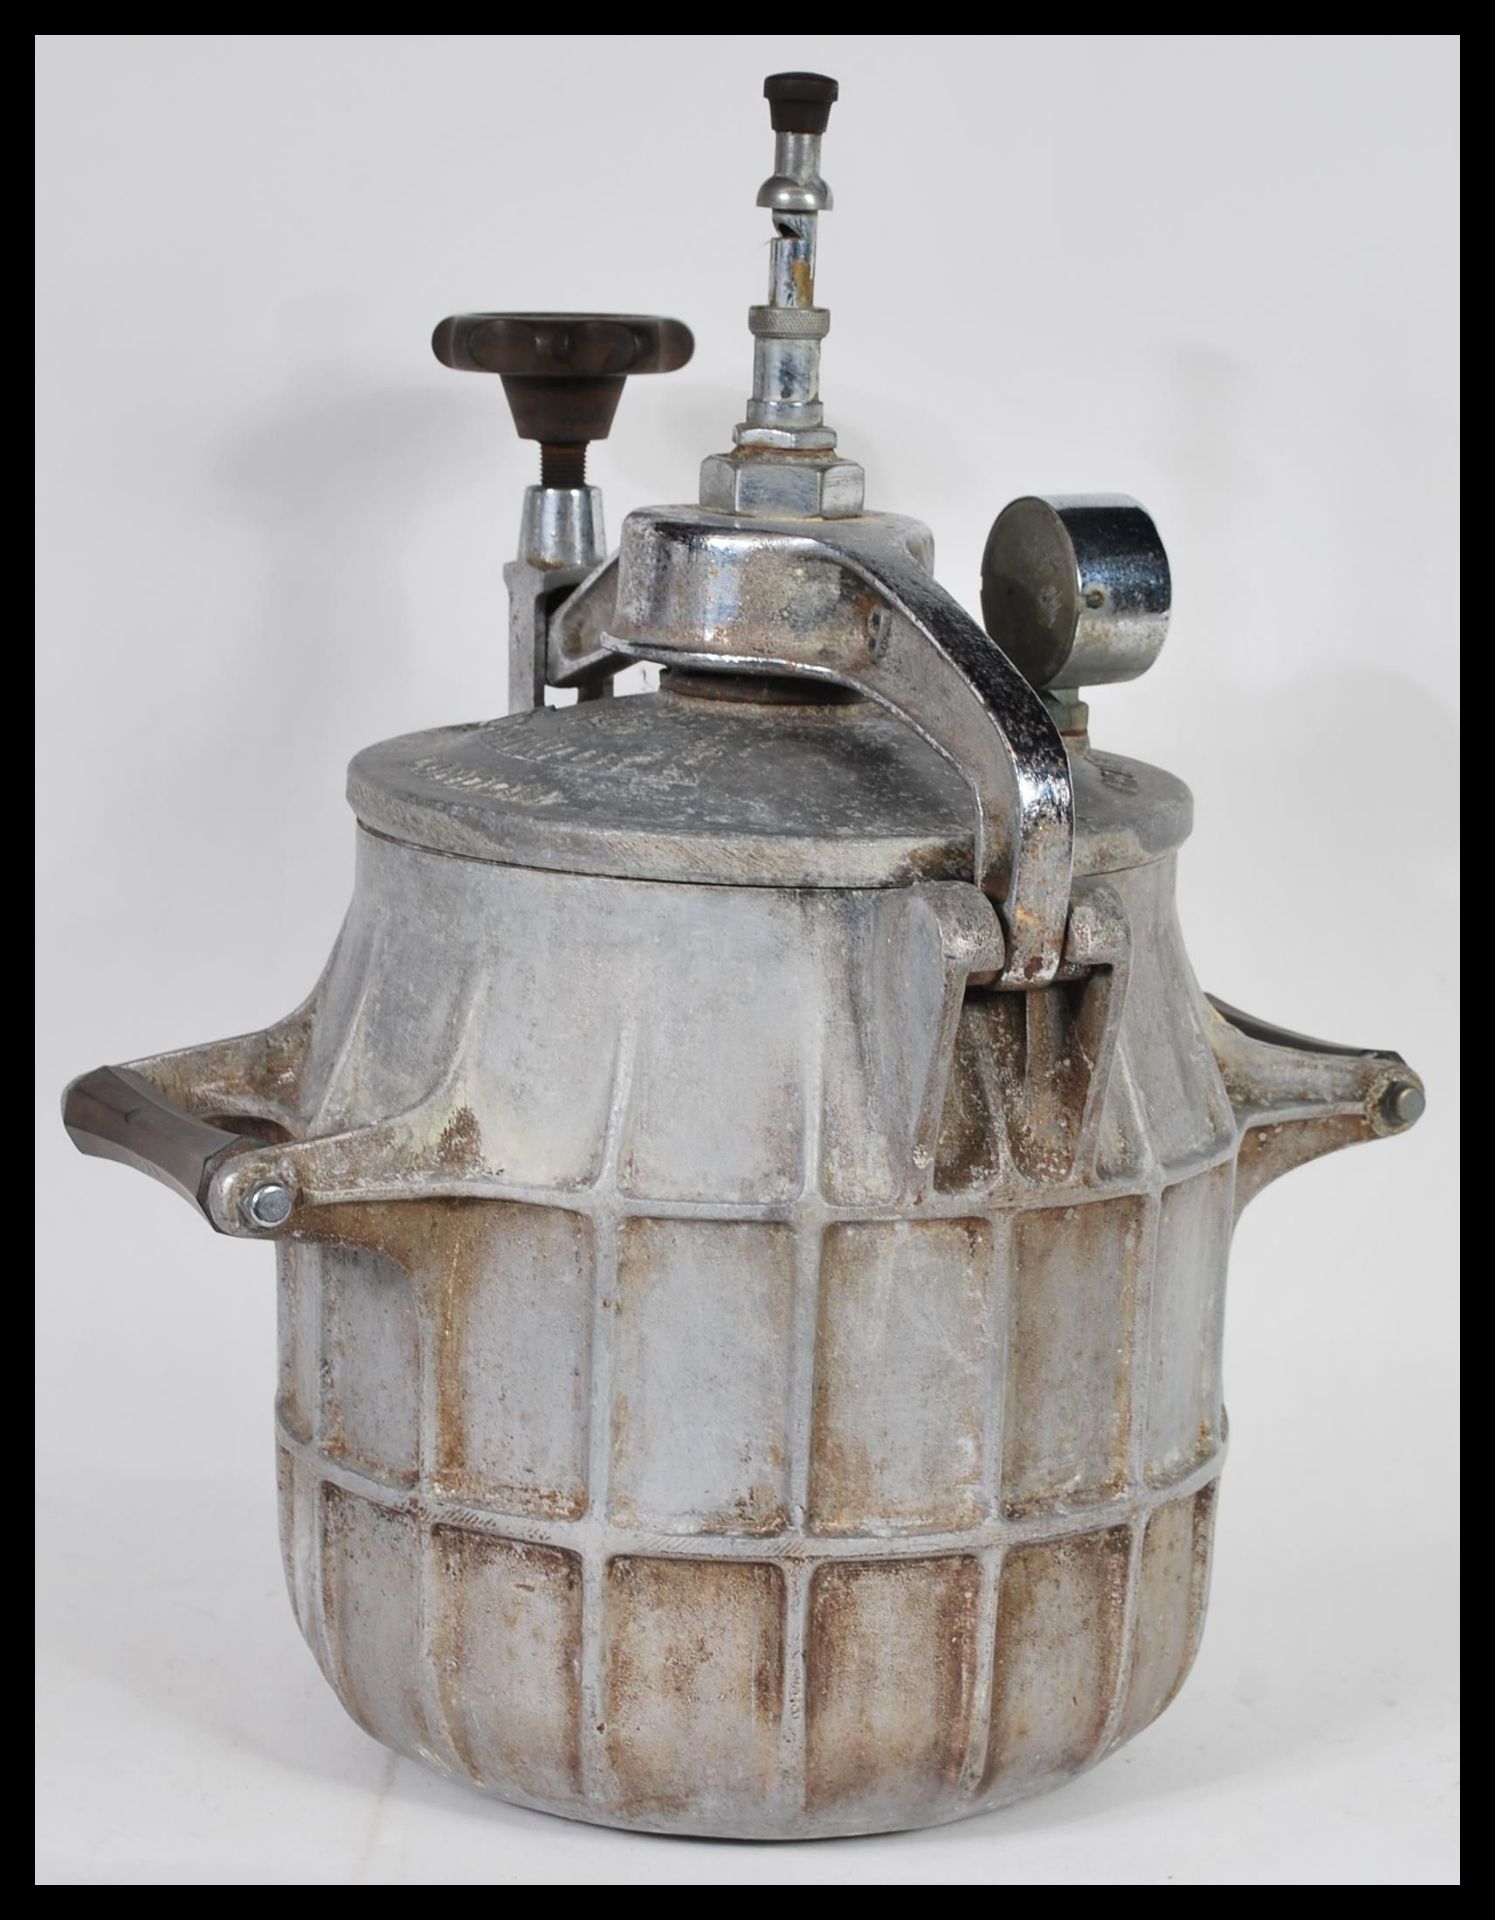 A rare vintage 1930's Easiwork pressure cooker. Ribbed iron / steel construction with pressure gauge